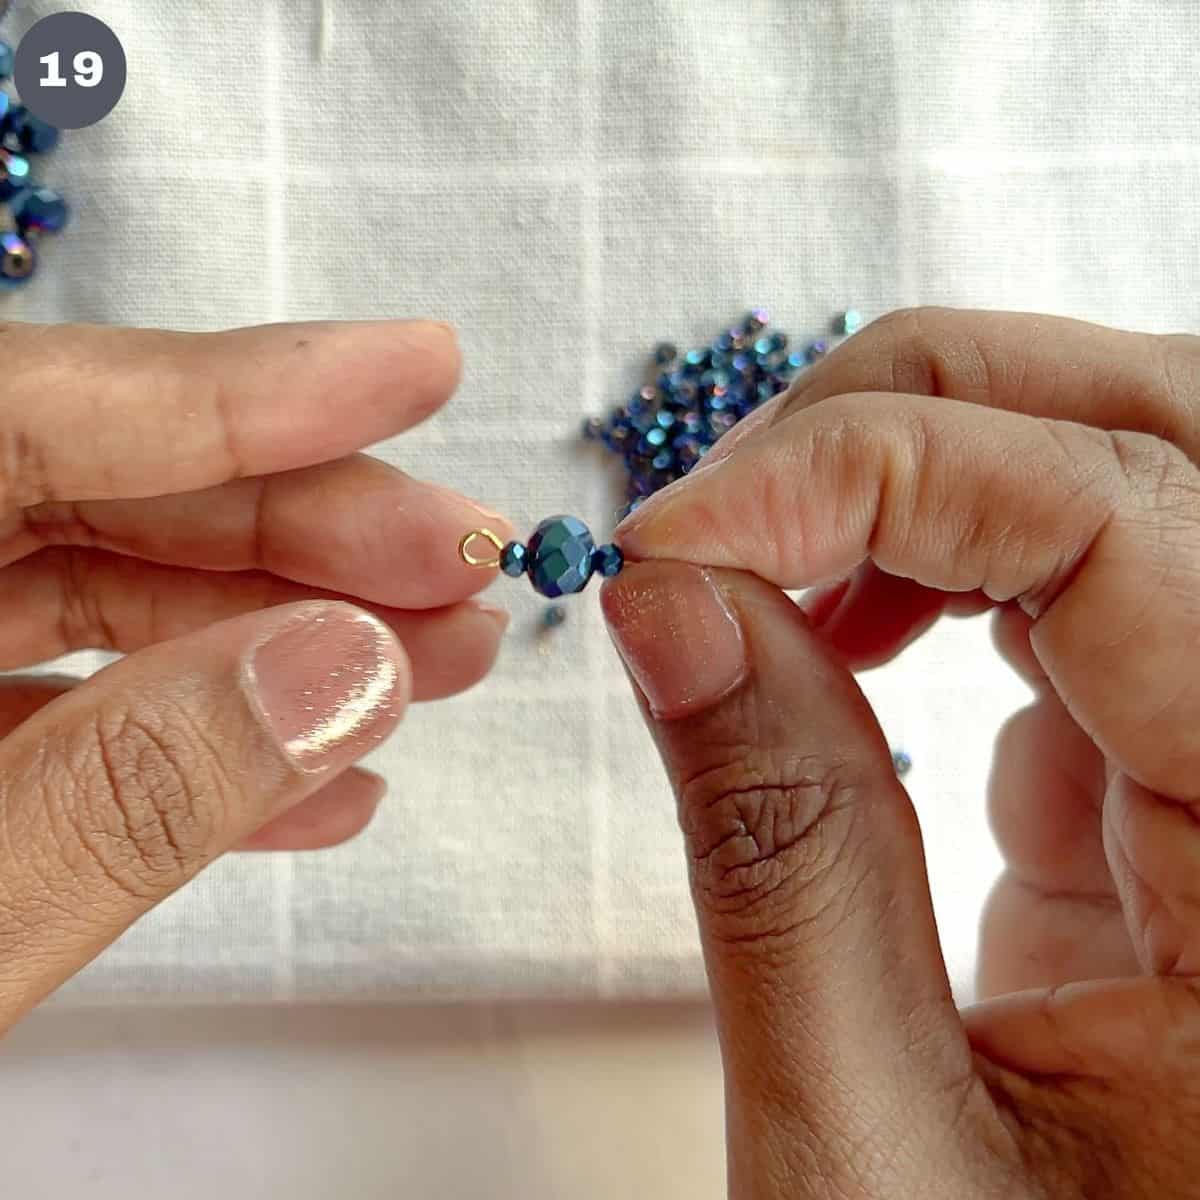 A row of small, big and small blue beads in an eye pin.